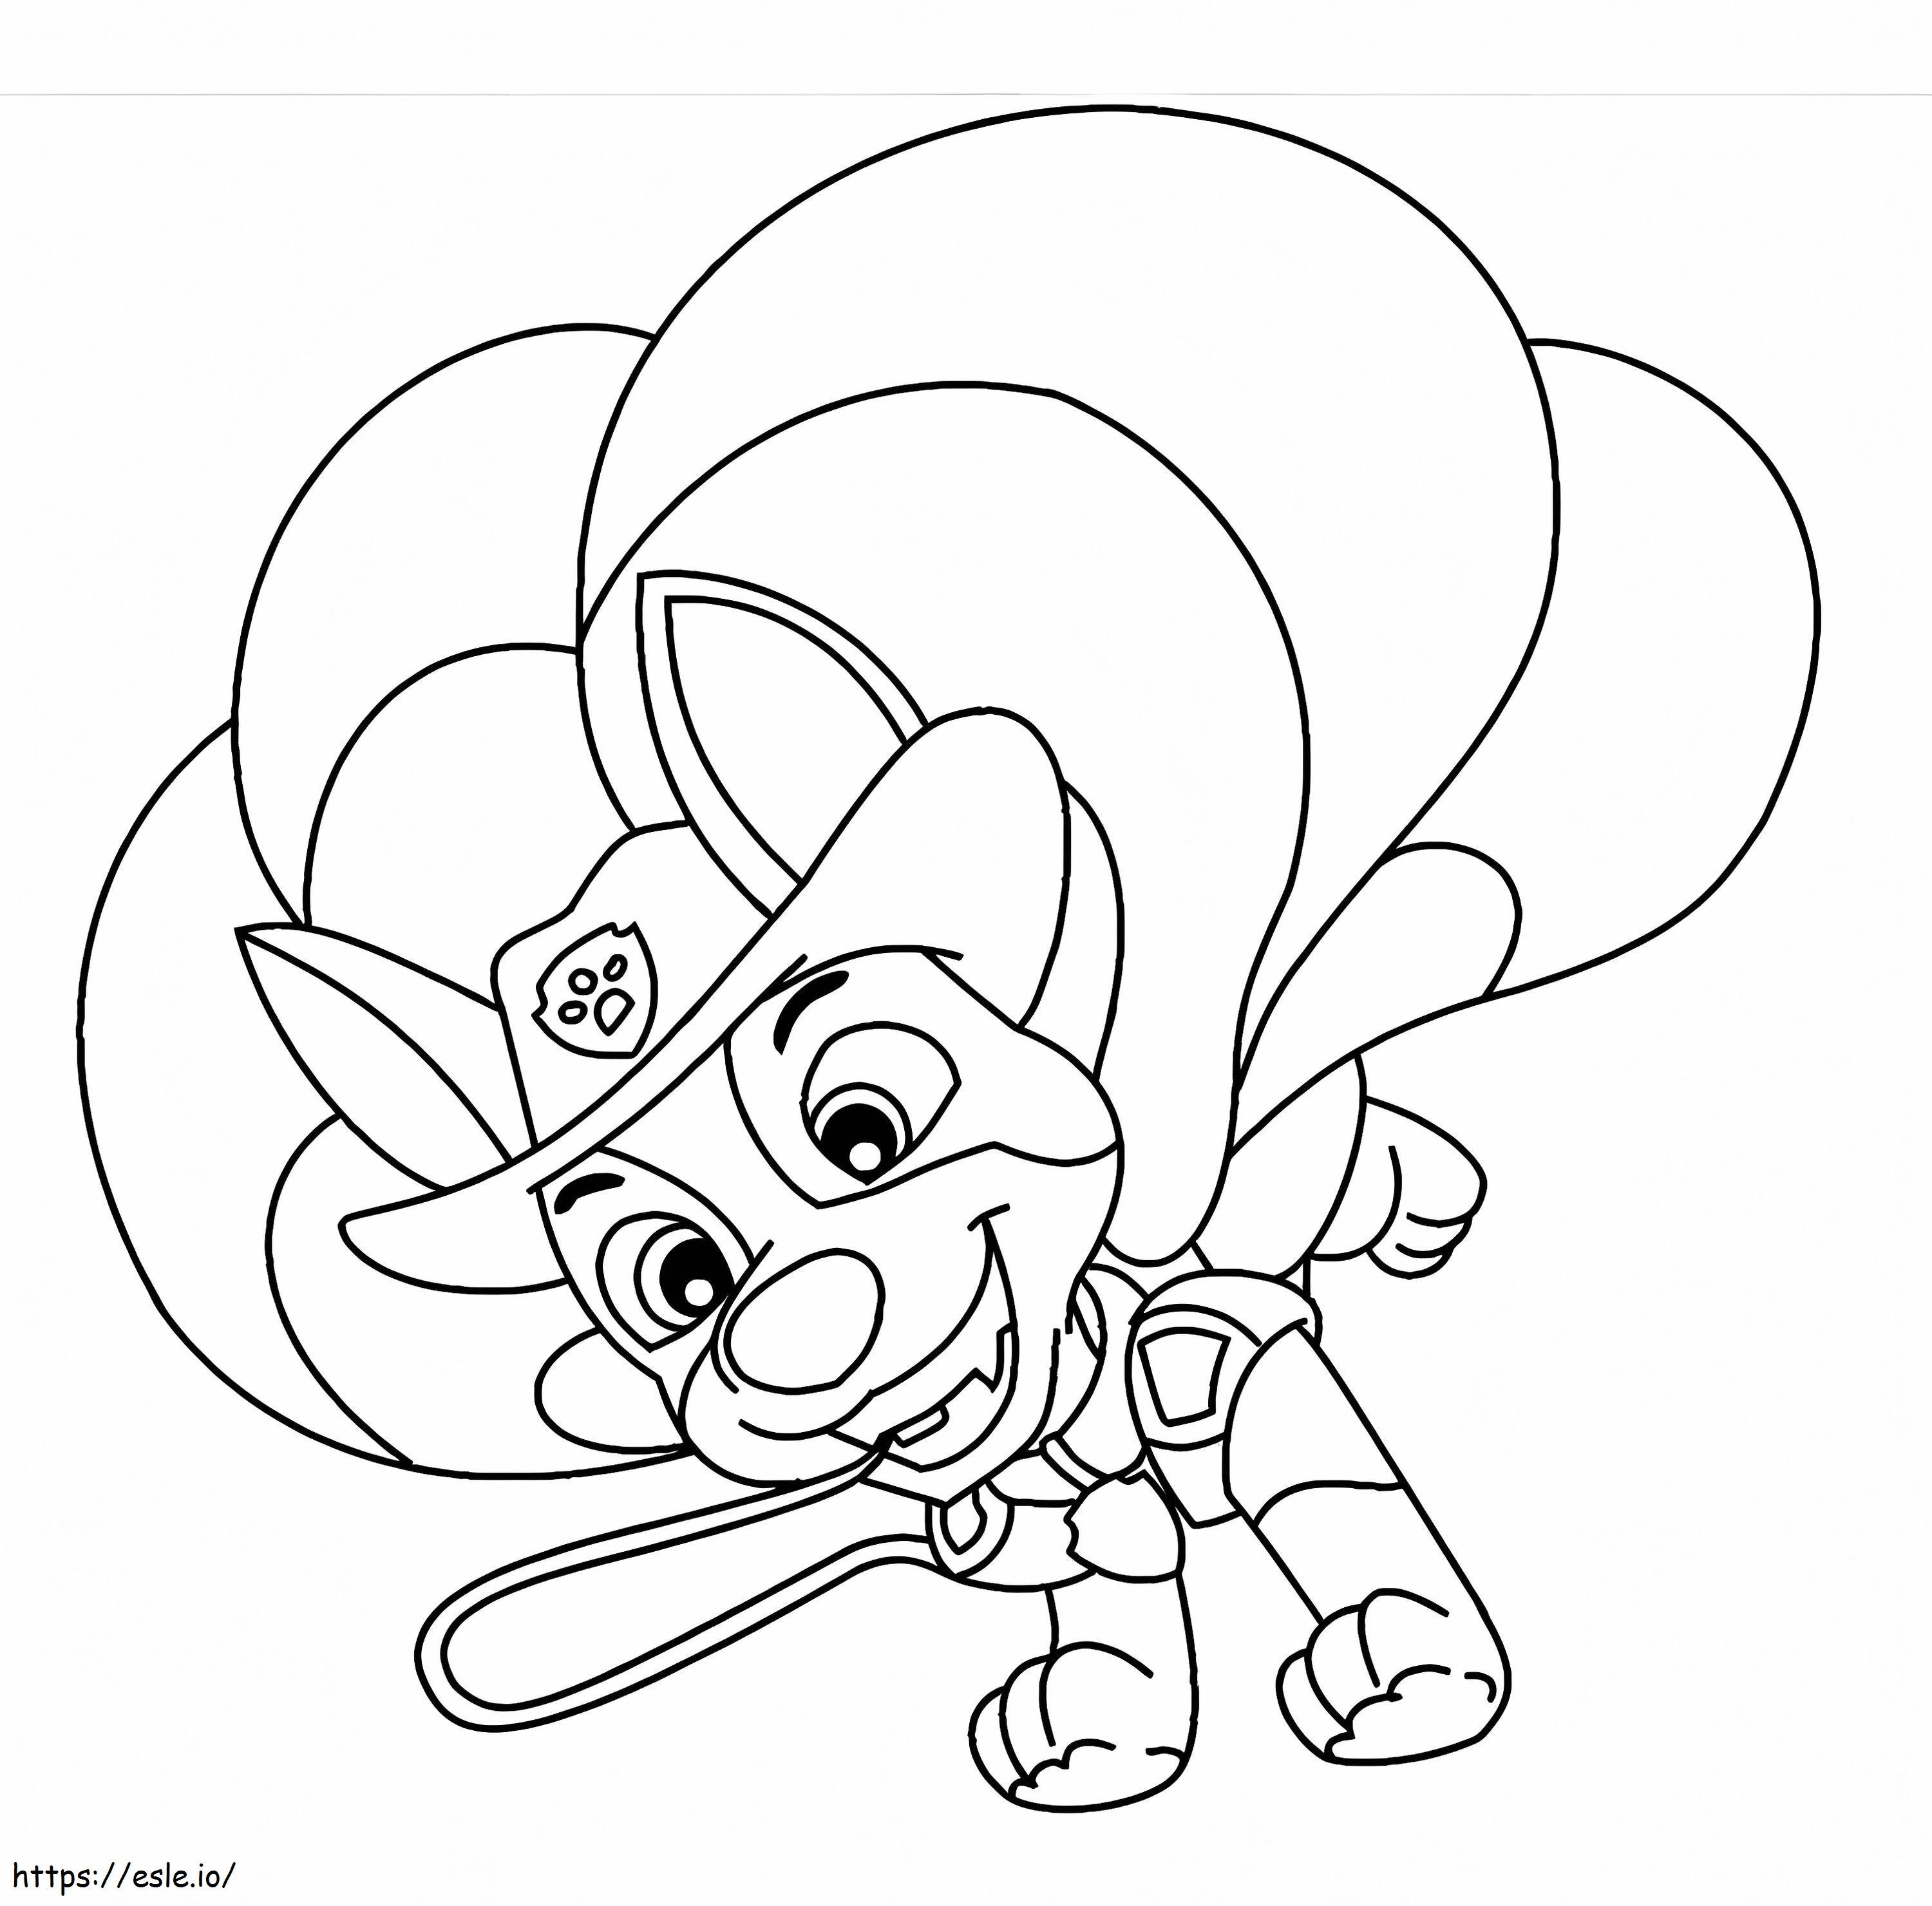 Cool Tracker coloring page